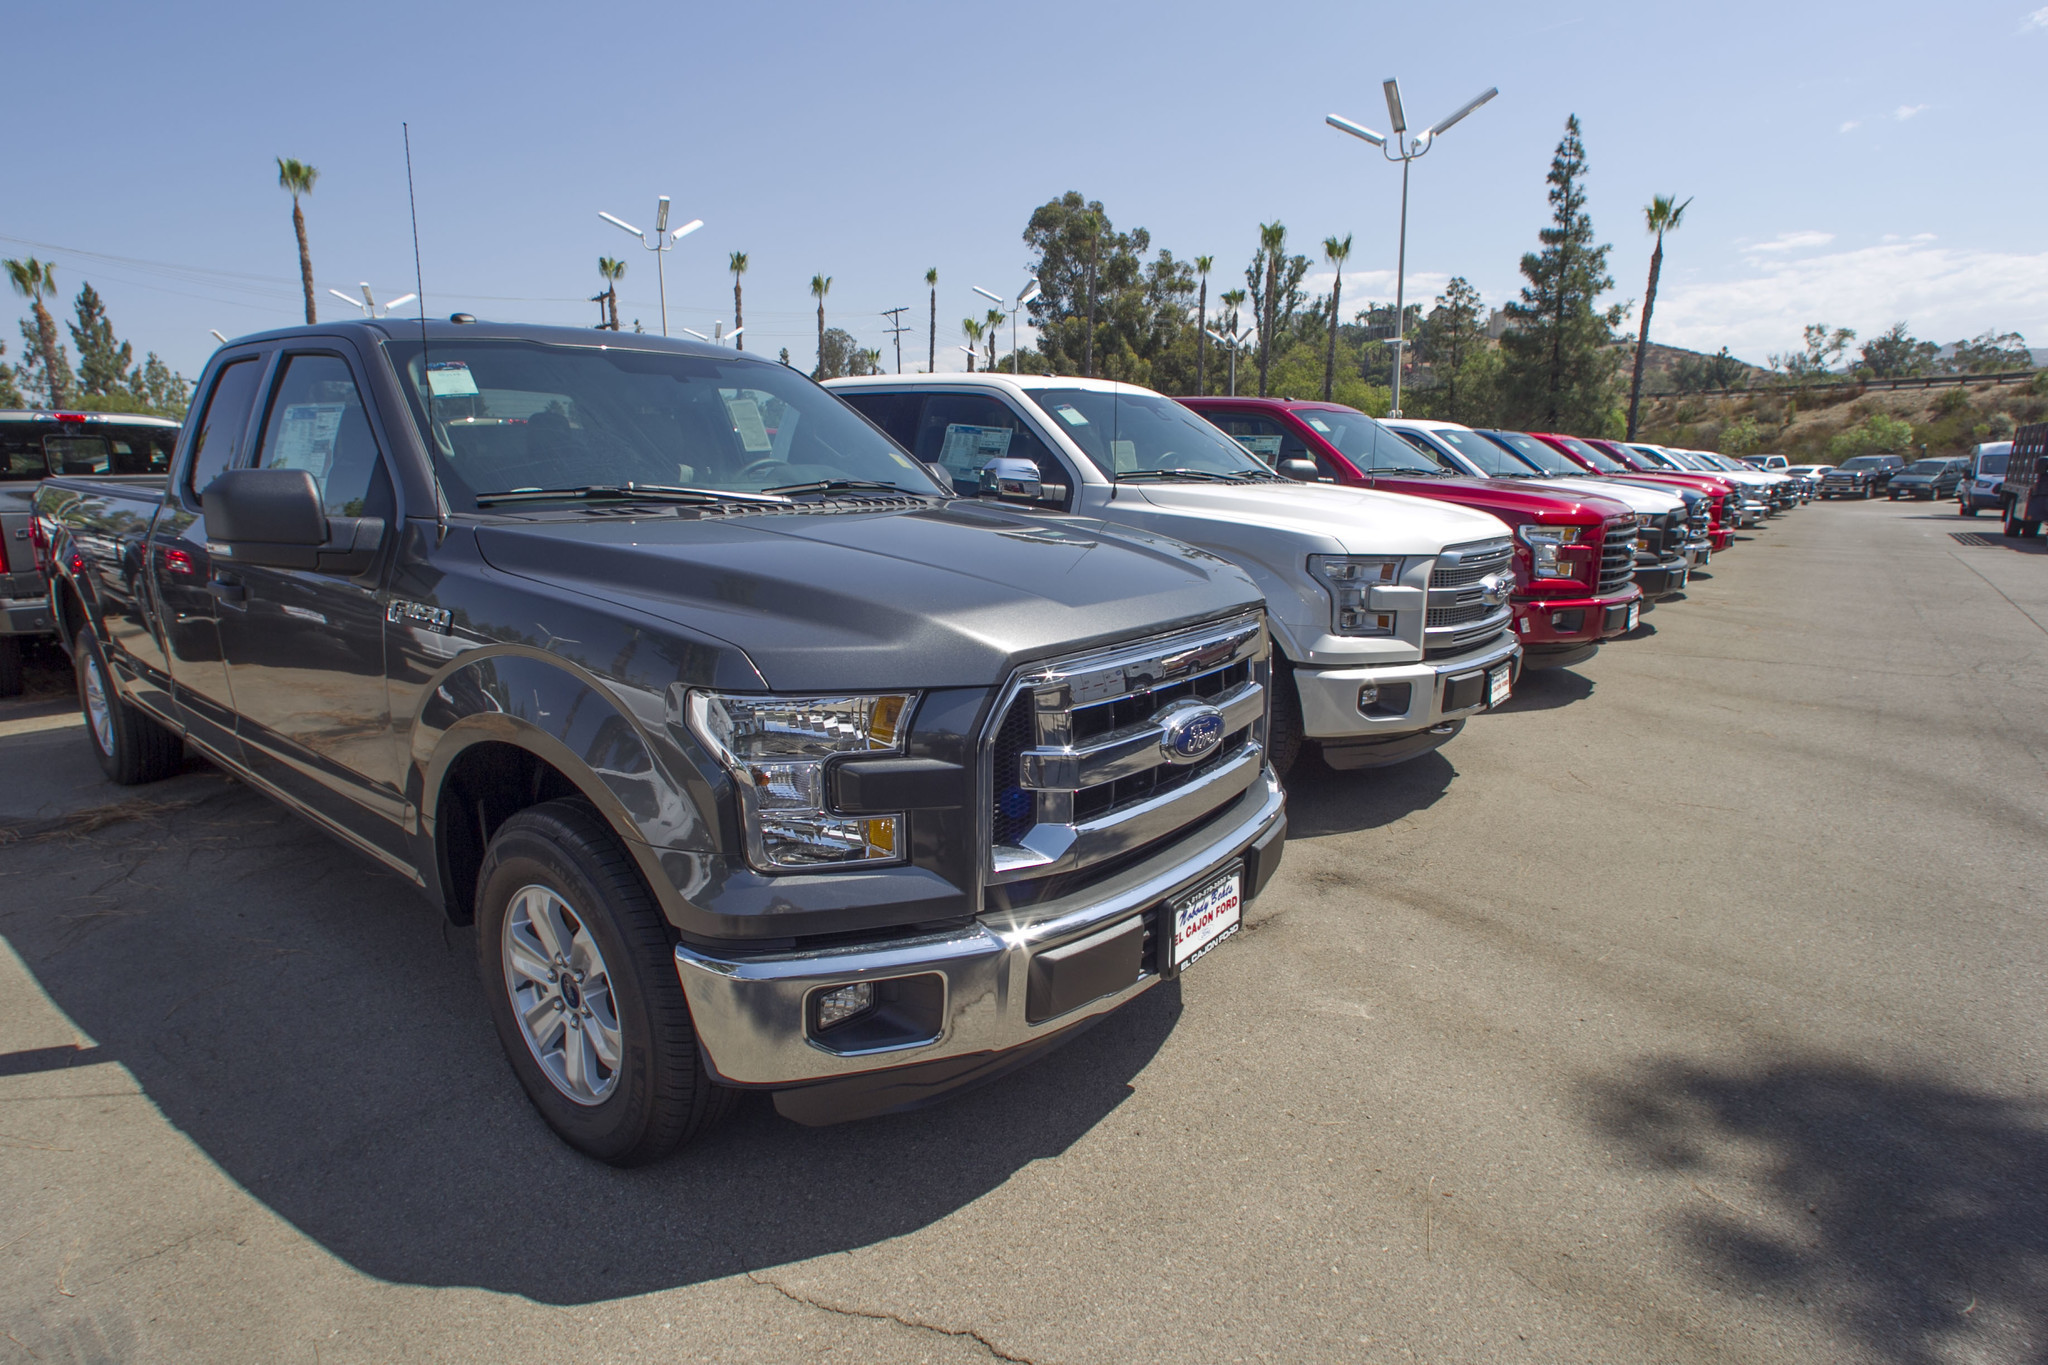 California new vehicle sales cool in 2016, but still top 2 million